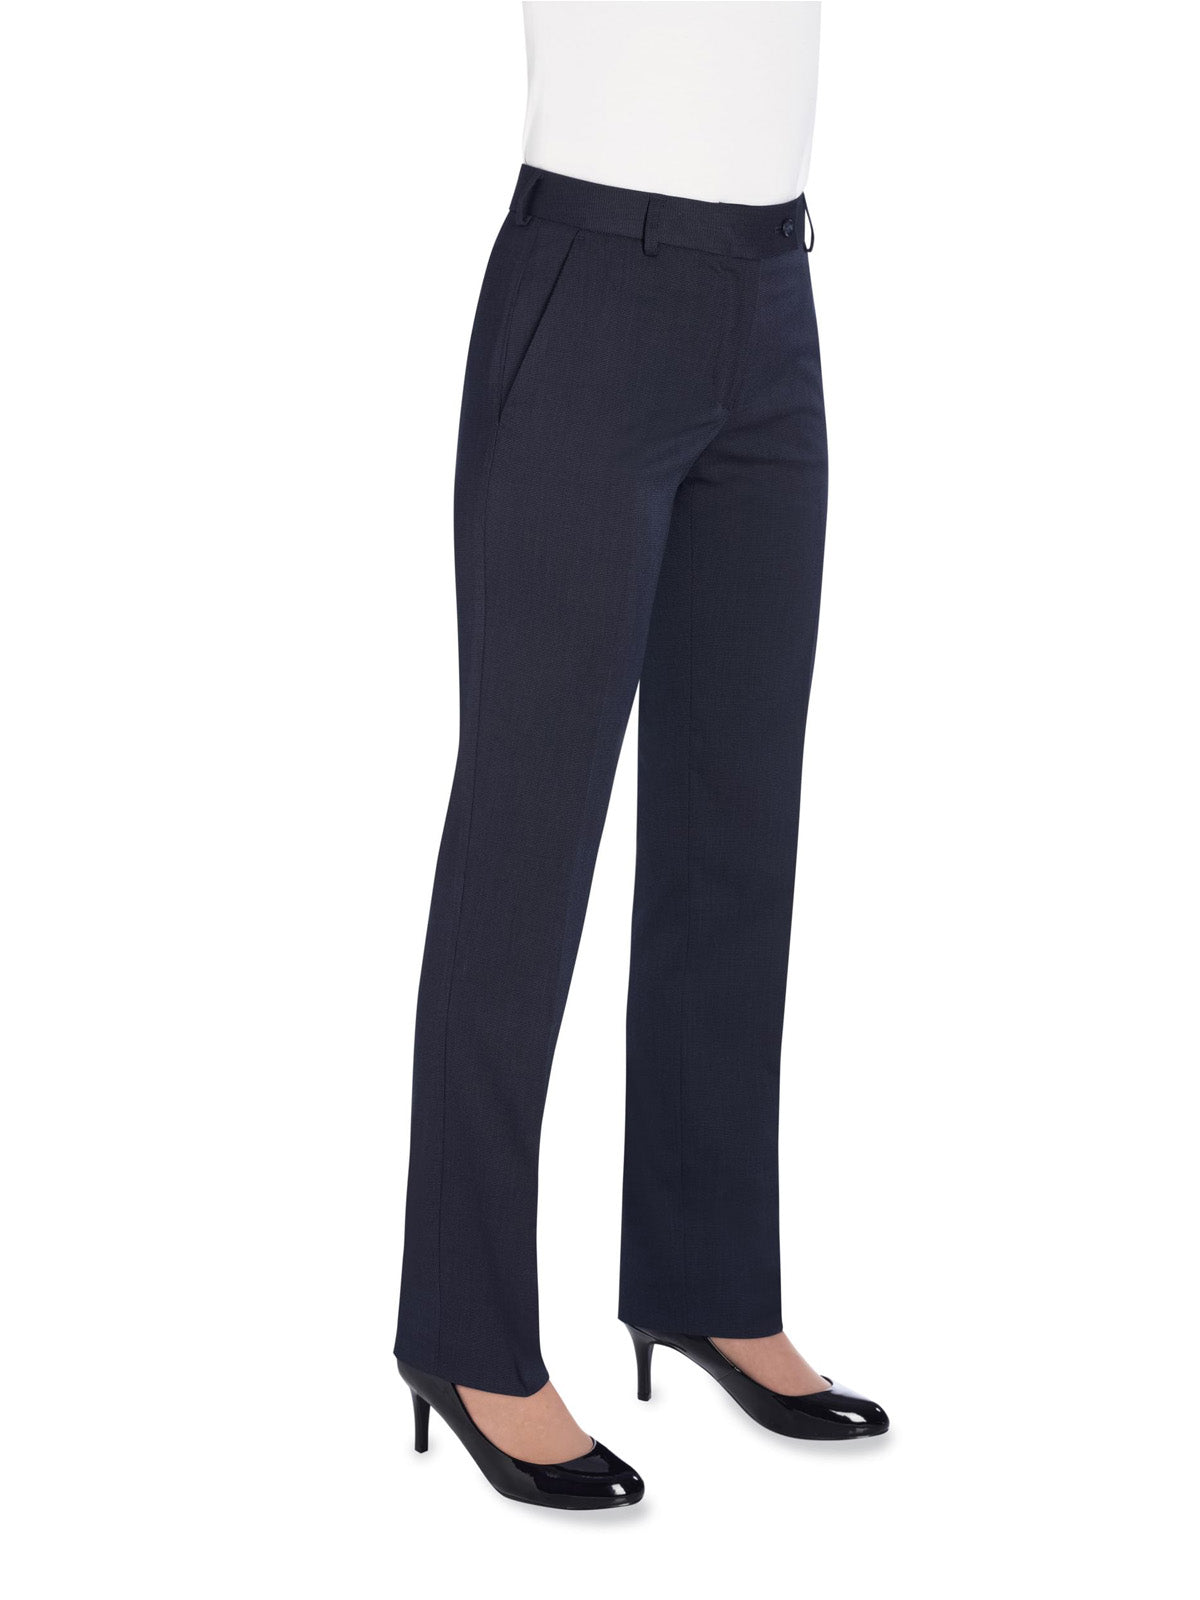 Brook Taverner Bianca Tailored Fit Trouser in  Navy Pindot